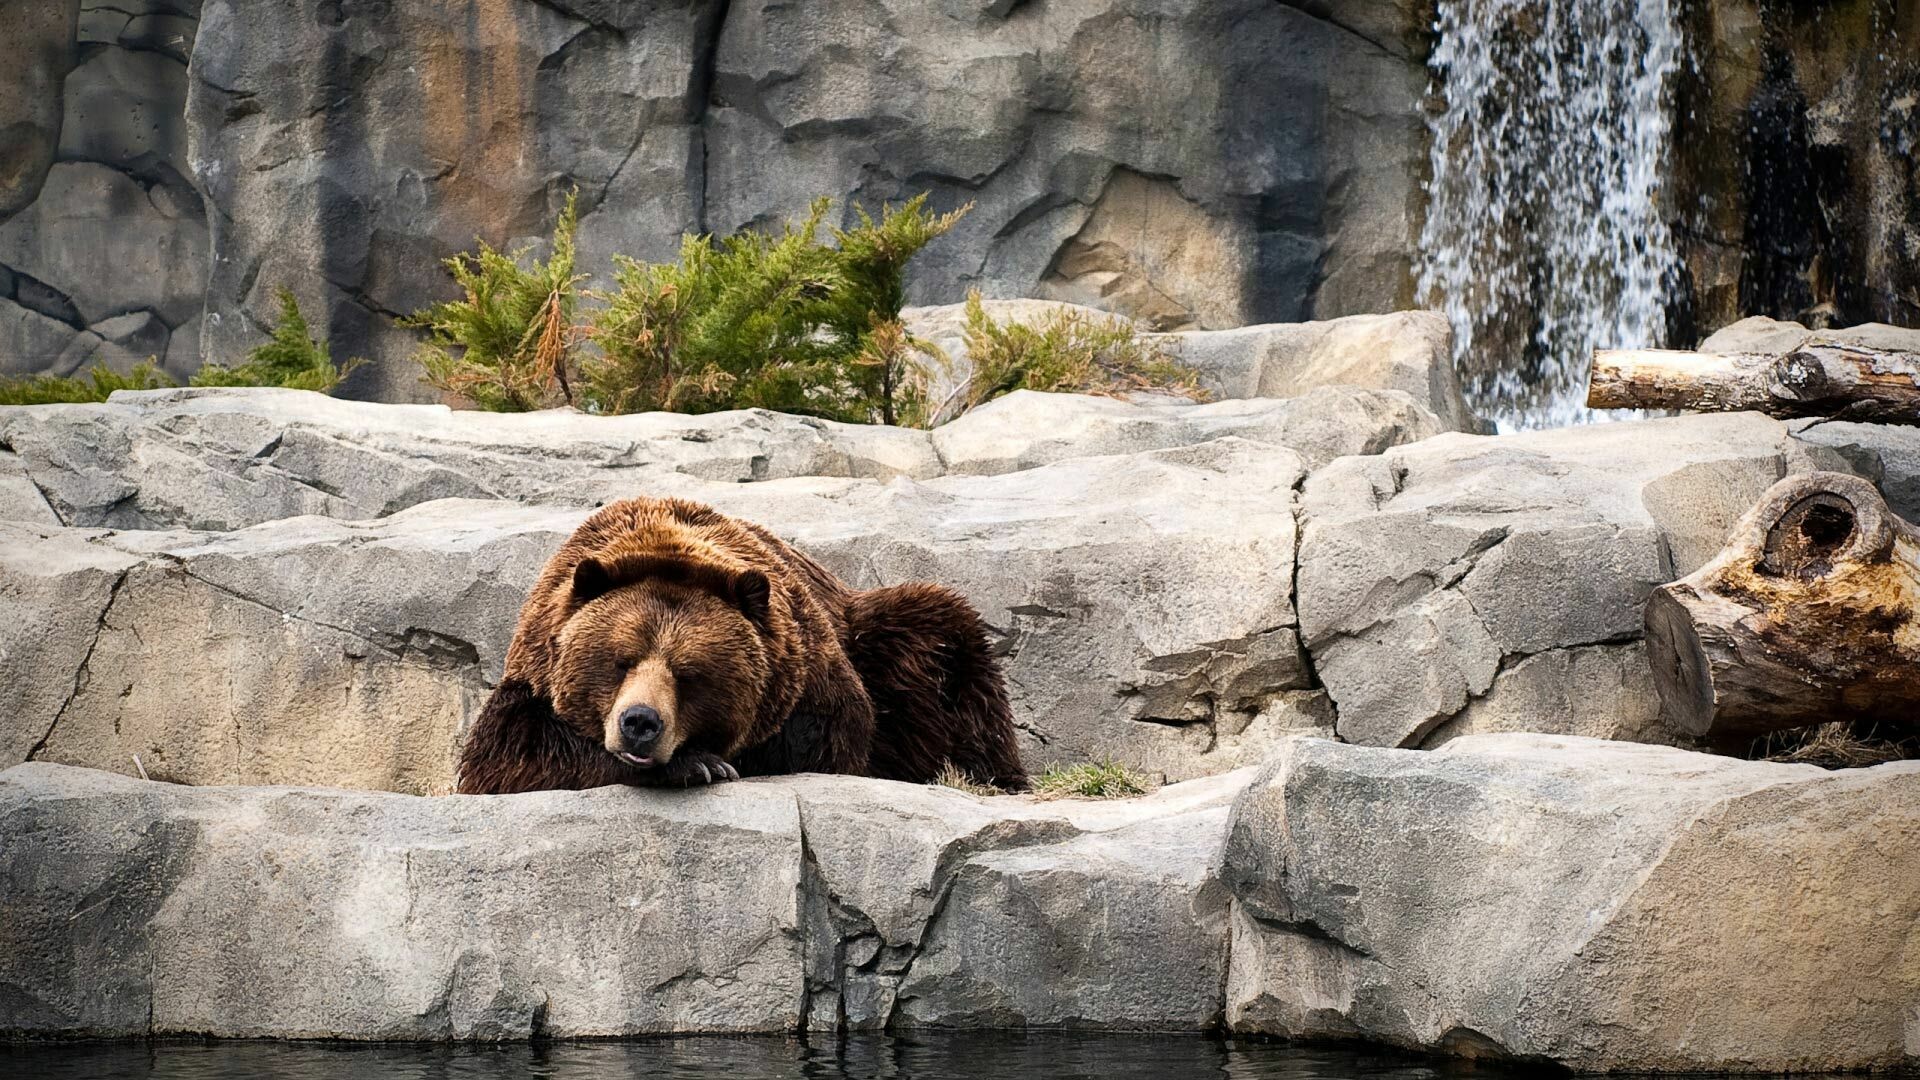 Bear: Grizzly, Ursus arctos horribilis, Generally larger and heavier than other bears. 1920x1080 Full HD Wallpaper.